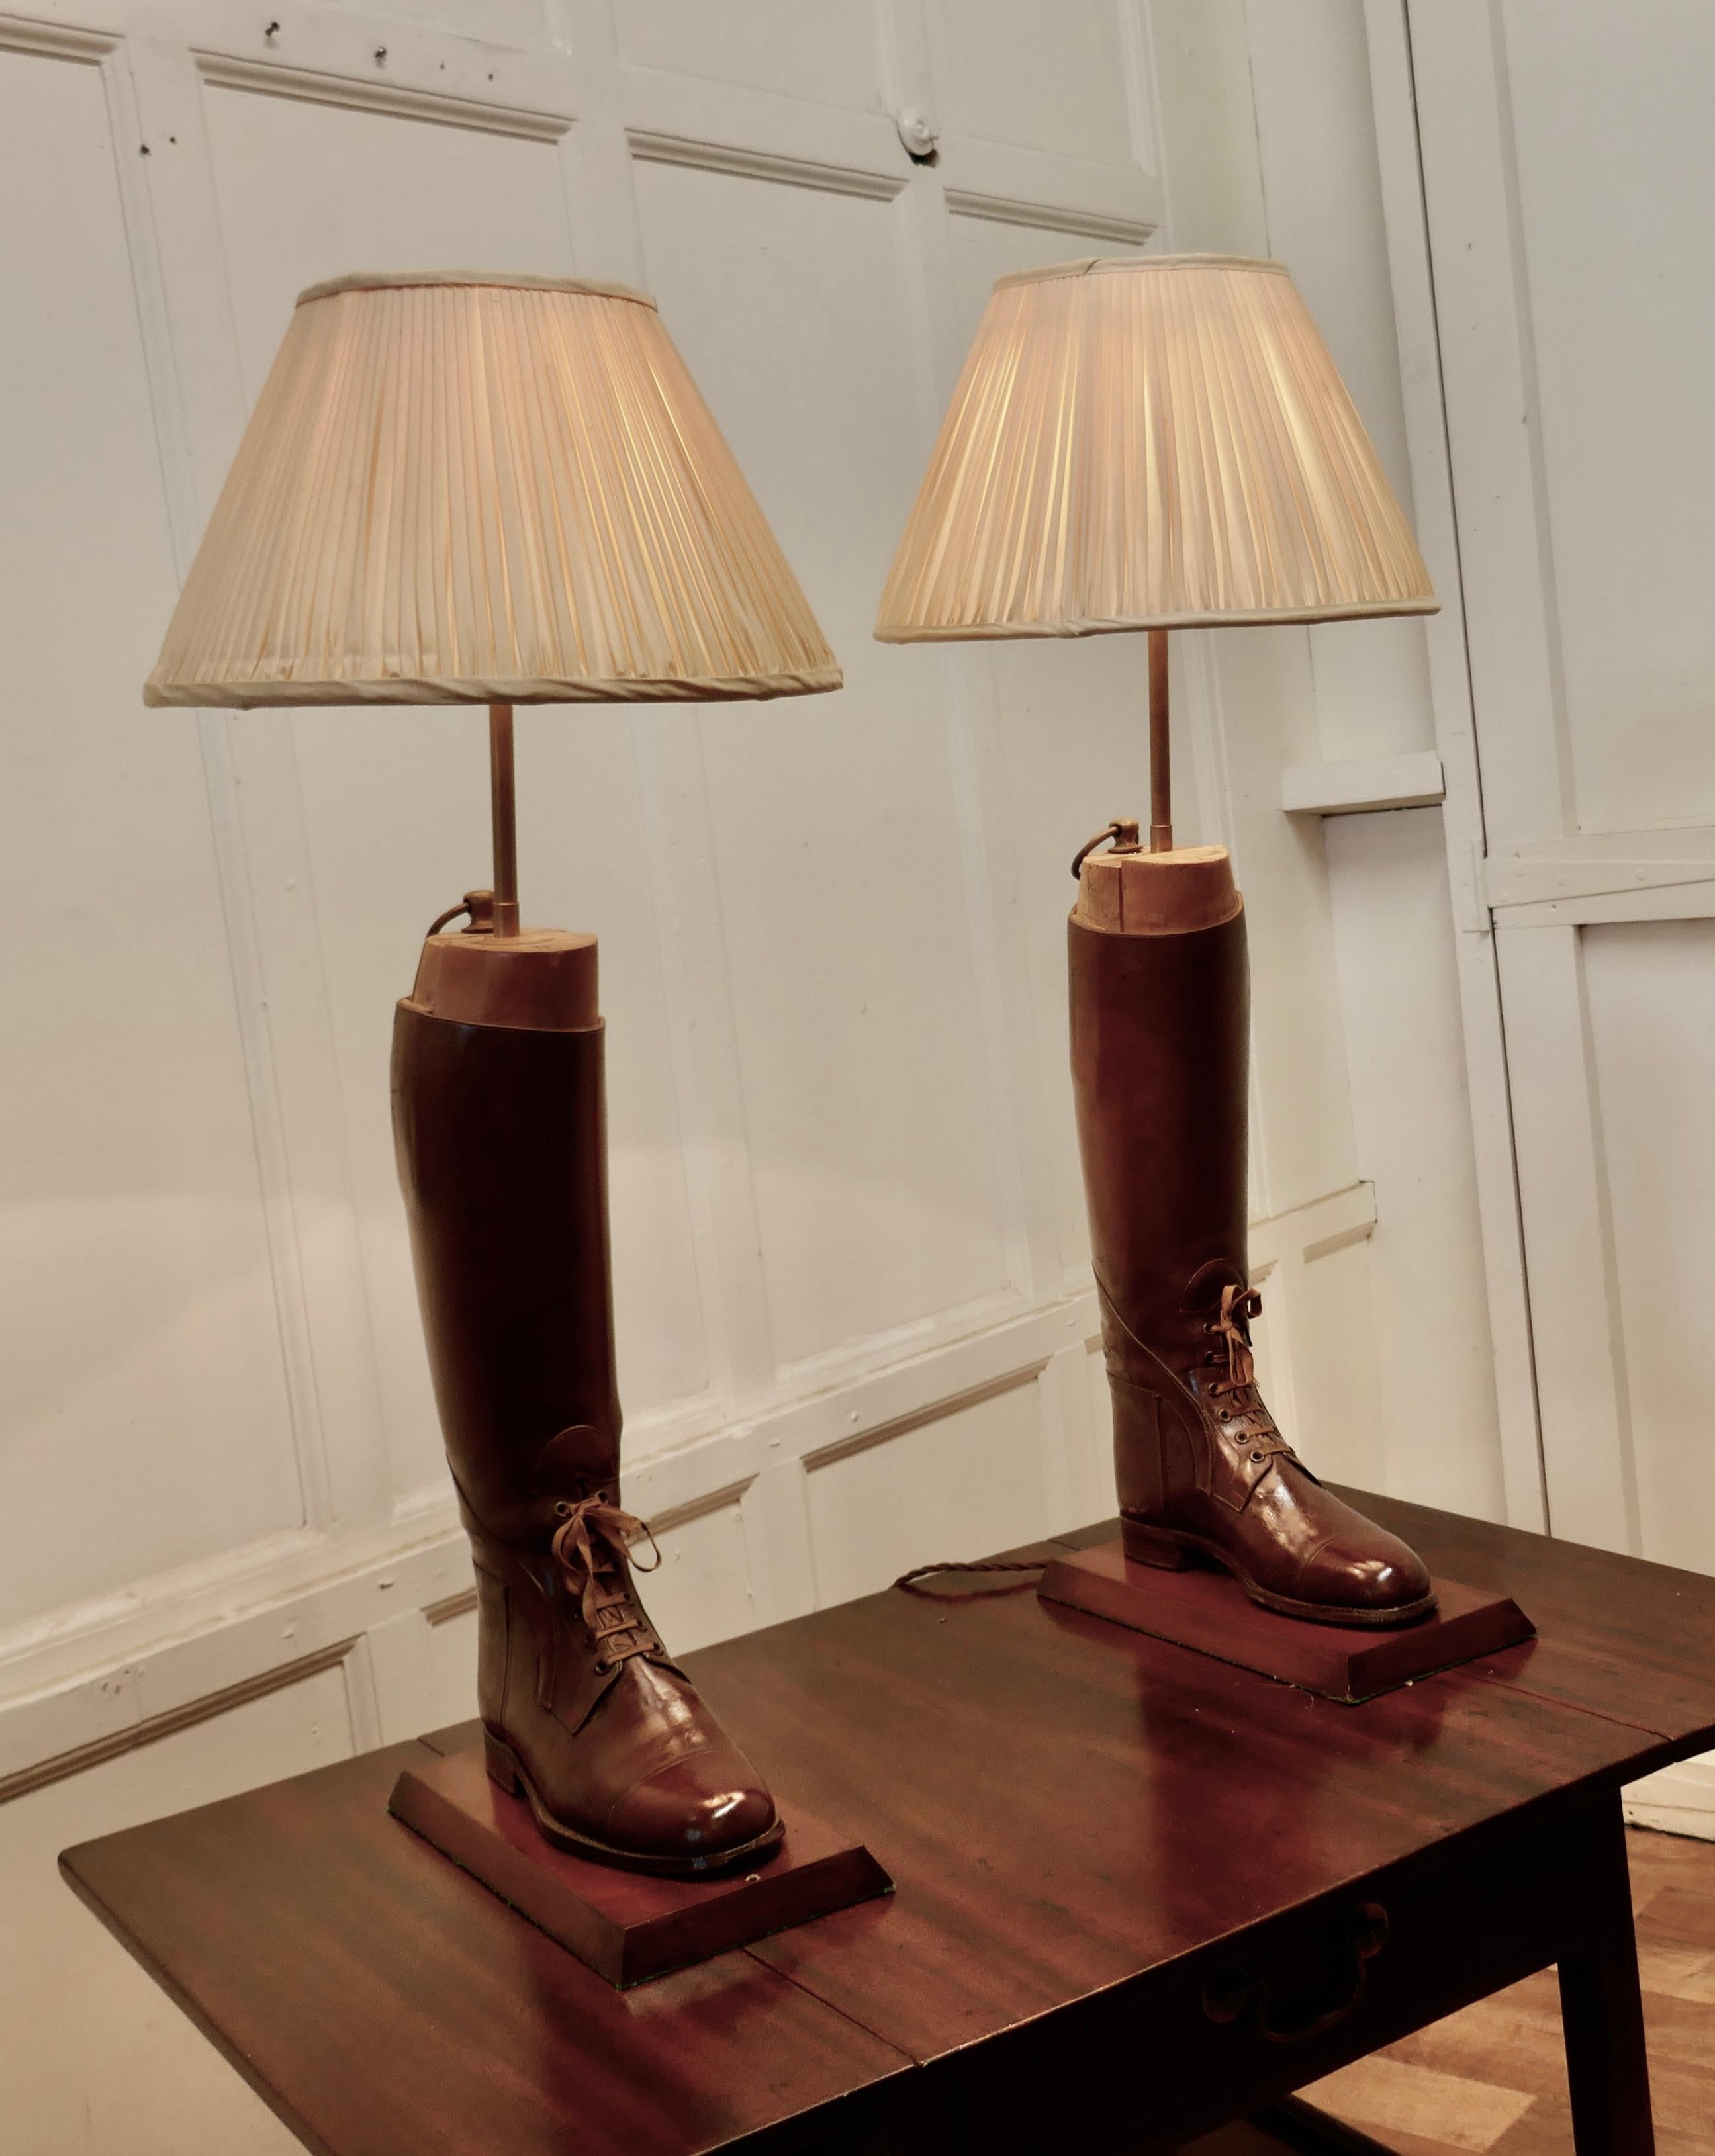 Pair of Boot Lamps, made from Early 20th Century Cavalry Officer’s Riding Boots

A great pair of Cavalry Officer’s Riding Boots from the early 20th Century, this superb looking pair of boots are complete with their wooden boot trees, they have